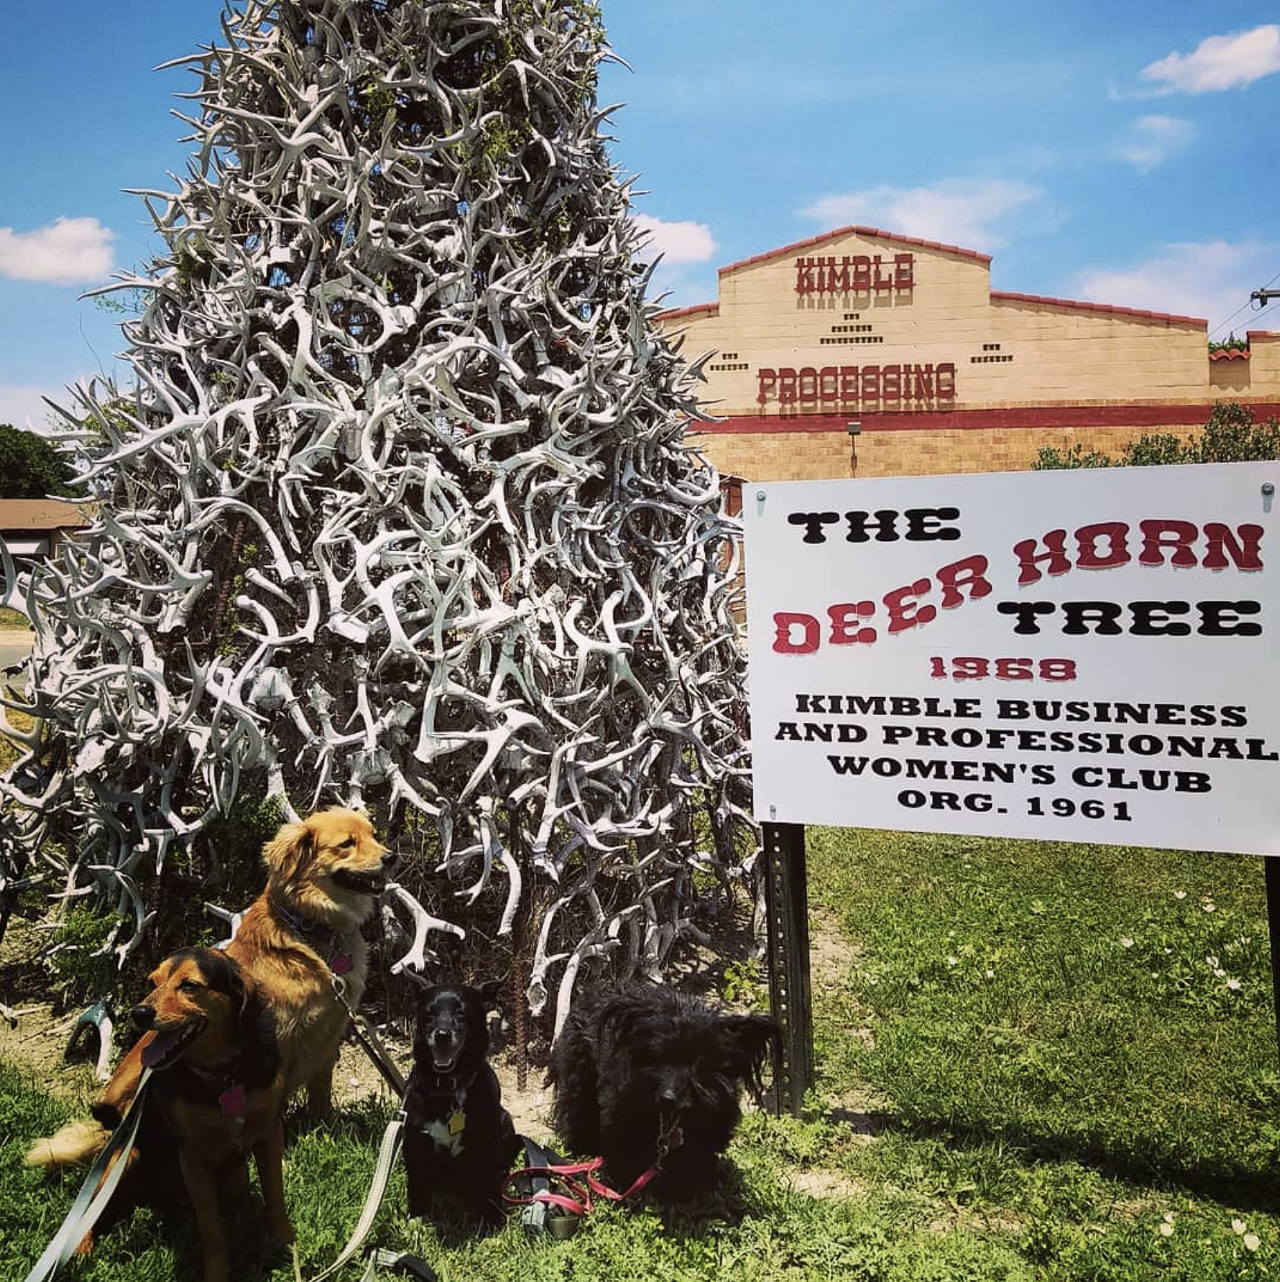 Deer Antlers / Deer Horn Tree, Junction, TX
1502 Main St., Junction, roadsideamerica.com
Deer Antlers have become a staple of hipster home decor, but in Junction, Texas residents piled discarded deer antlers high enough to become a a full-sized tree.
Photo via Instagram /  tere.sue